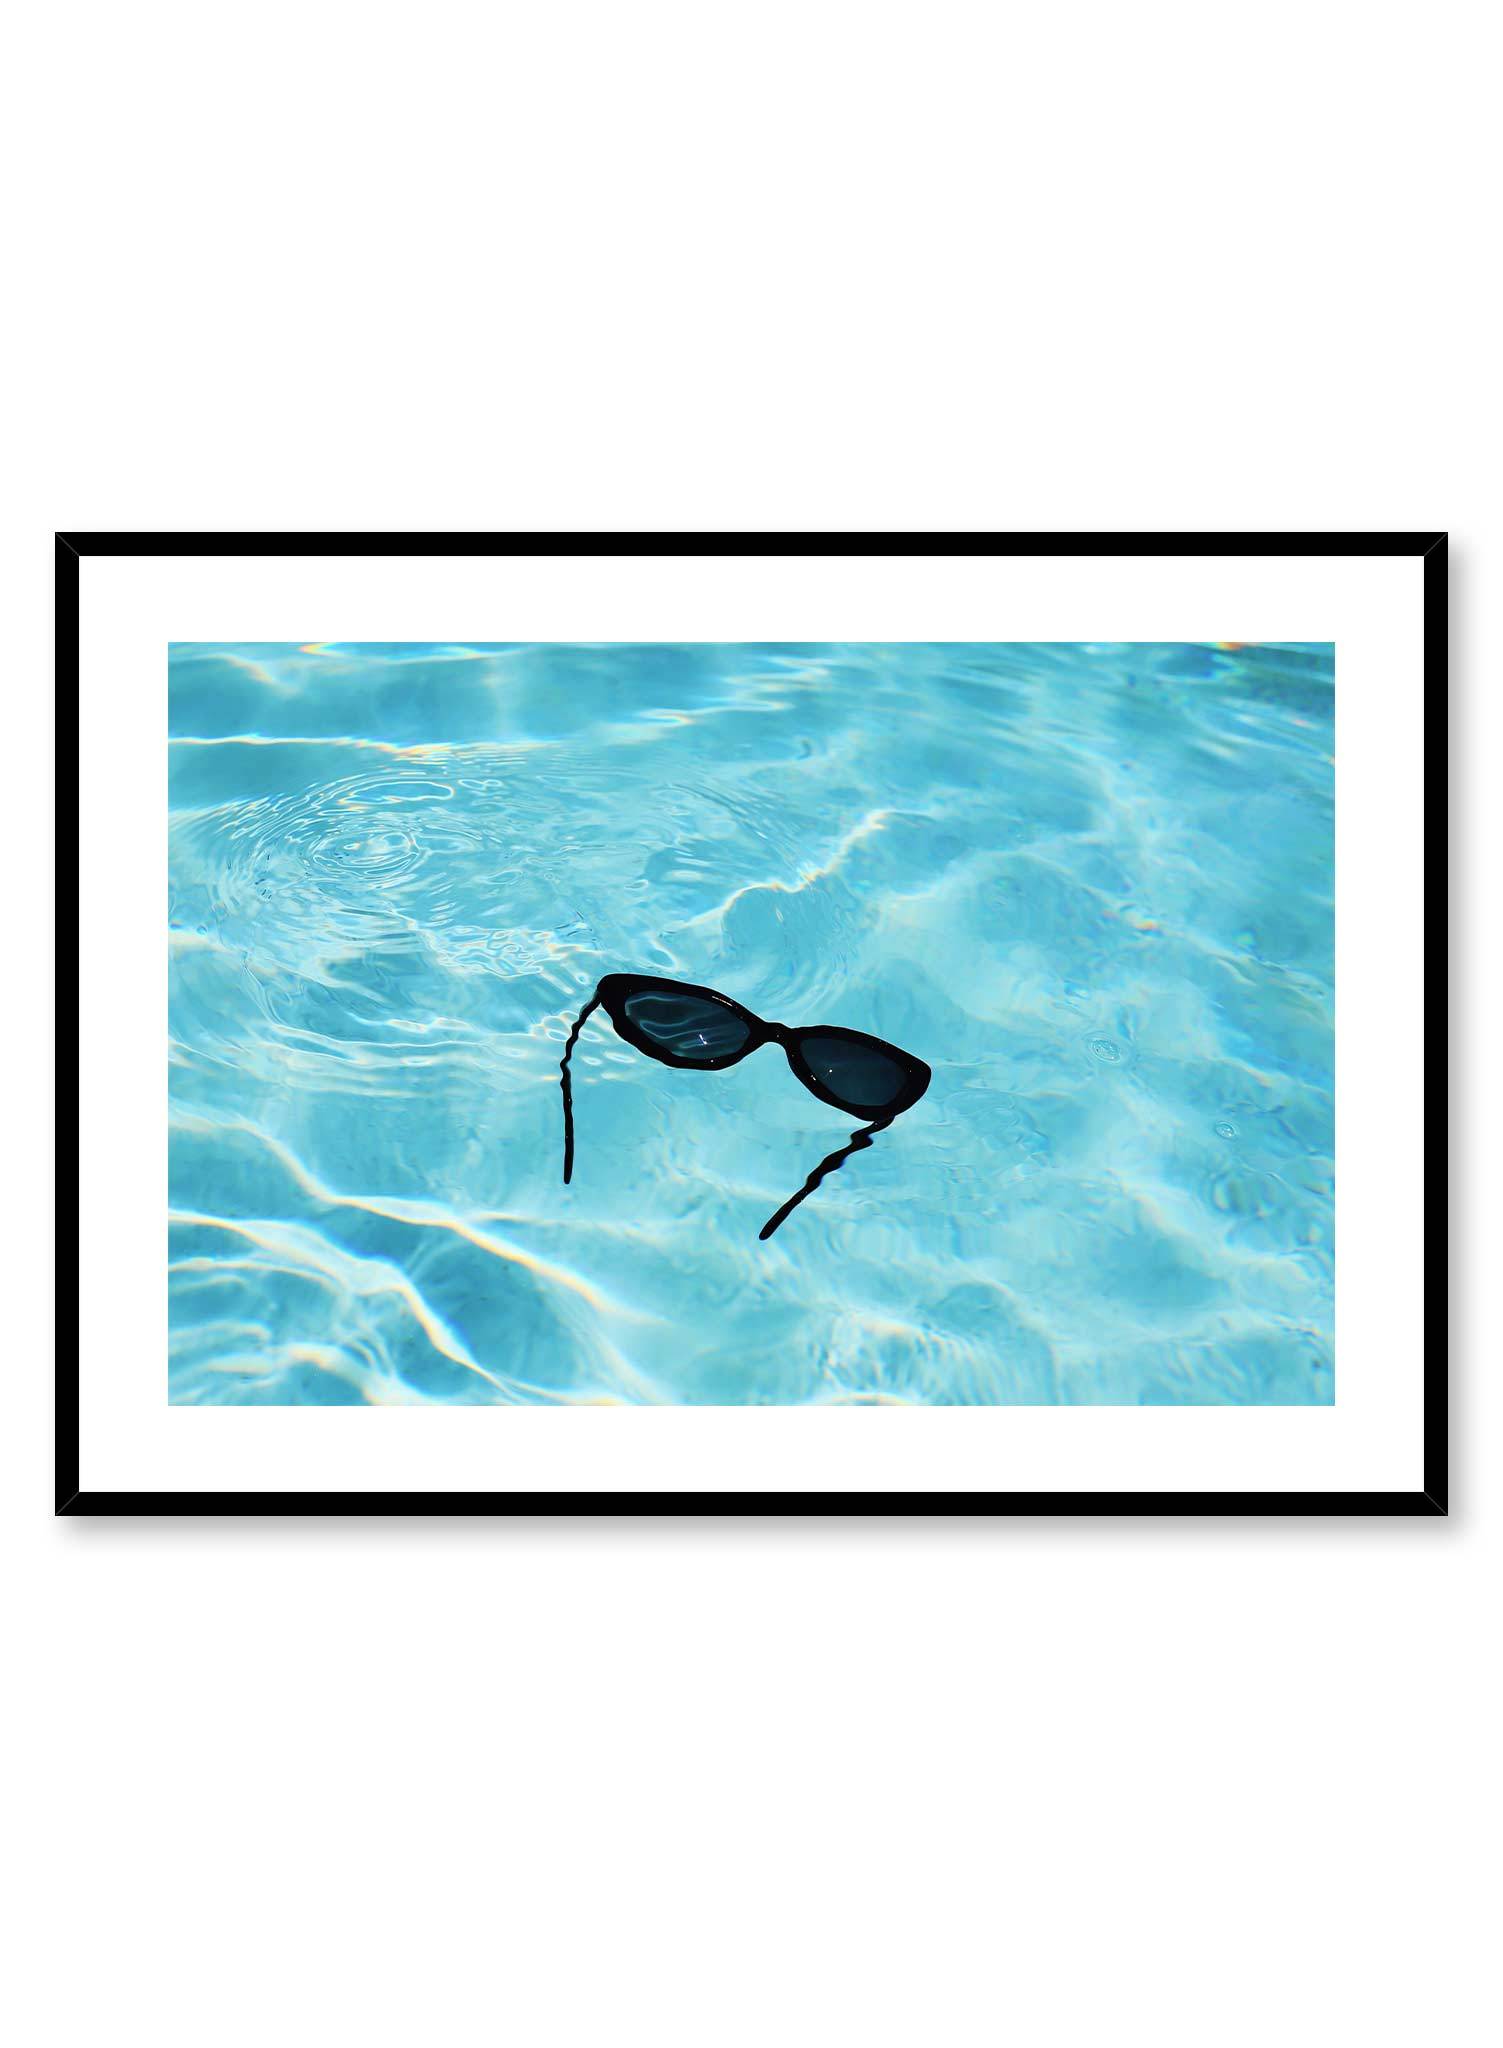 Floating Shades is a minimalist photography poster of a pair of glasses fallen into a pool by Opposite Wall.